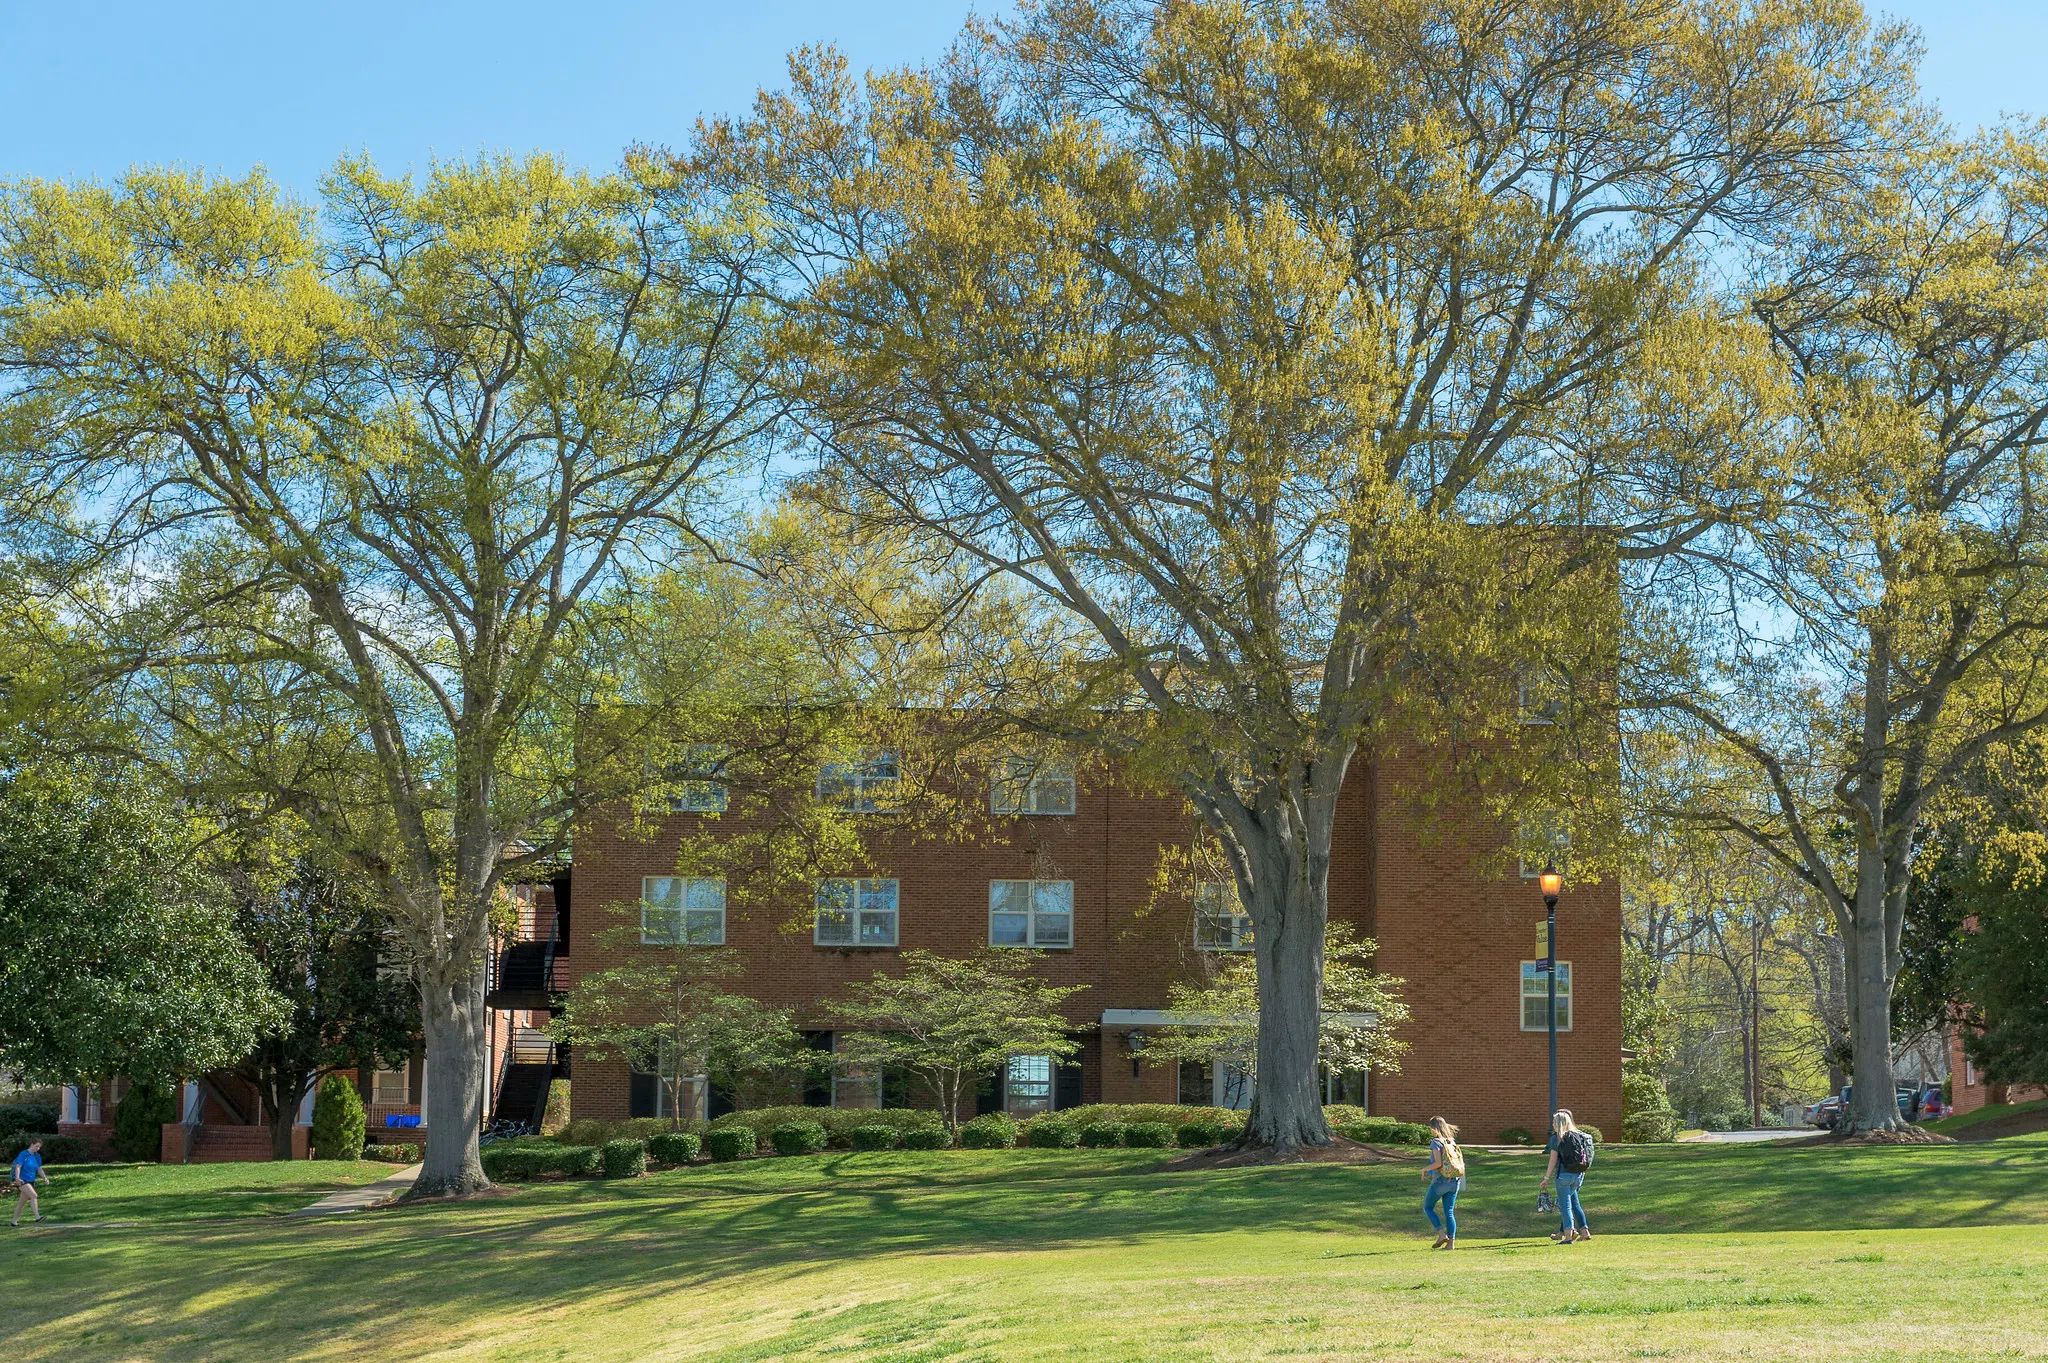 A three-story brick building is visible beyond tall trees blooming in spring.